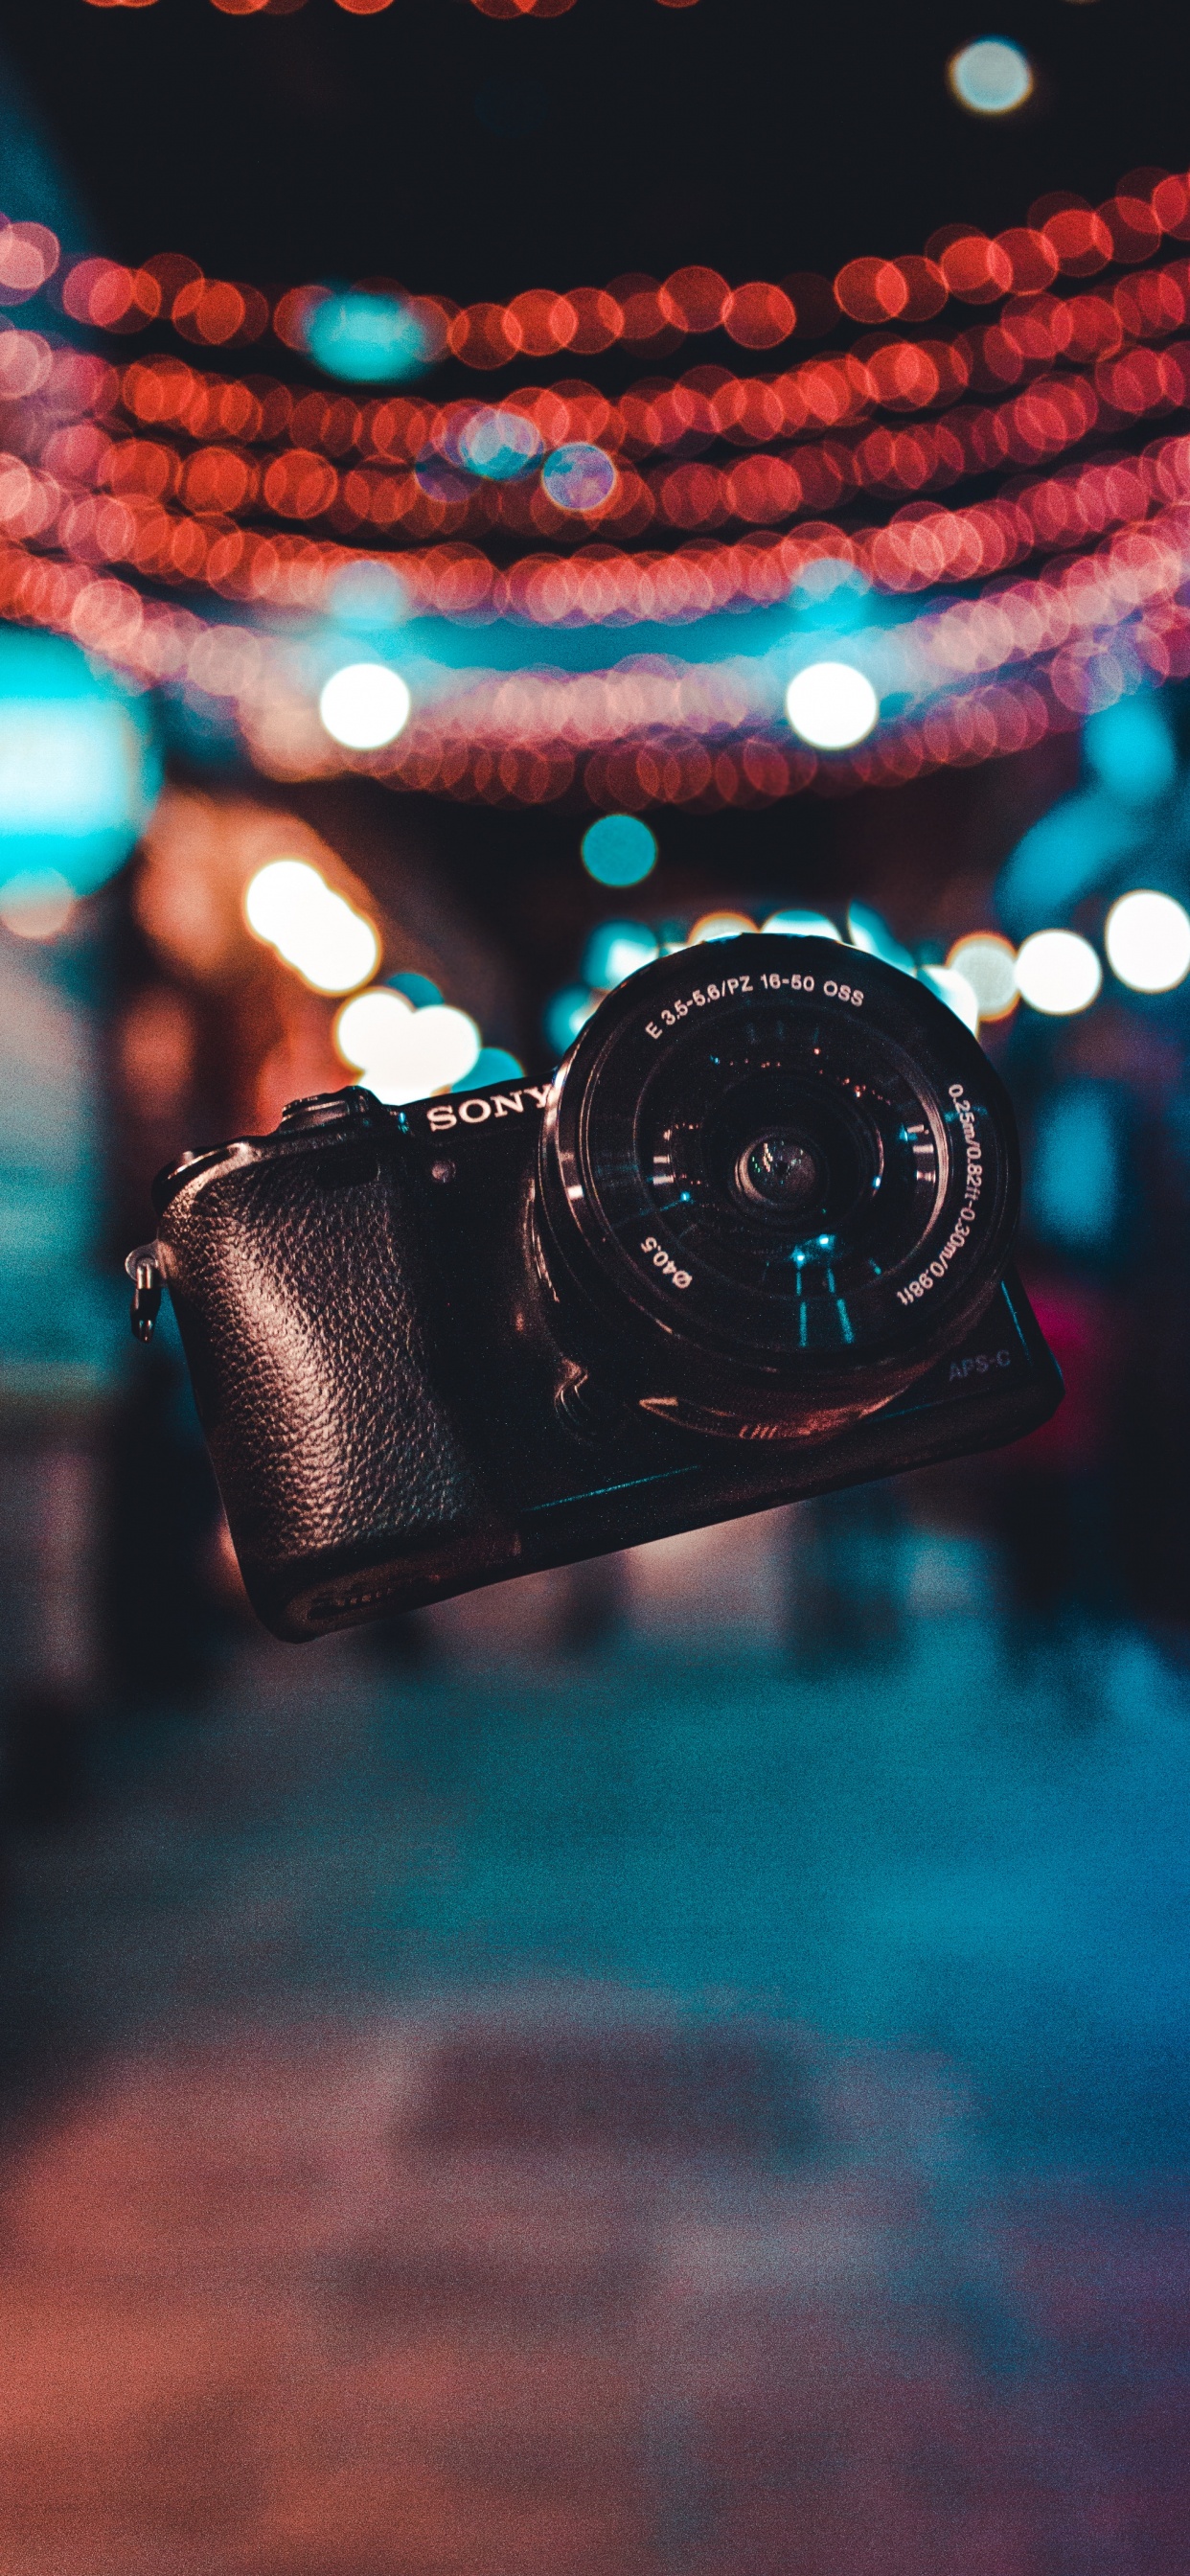 Black Dslr Camera on Blue and White String Lights. Wallpaper in 1242x2688 Resolution